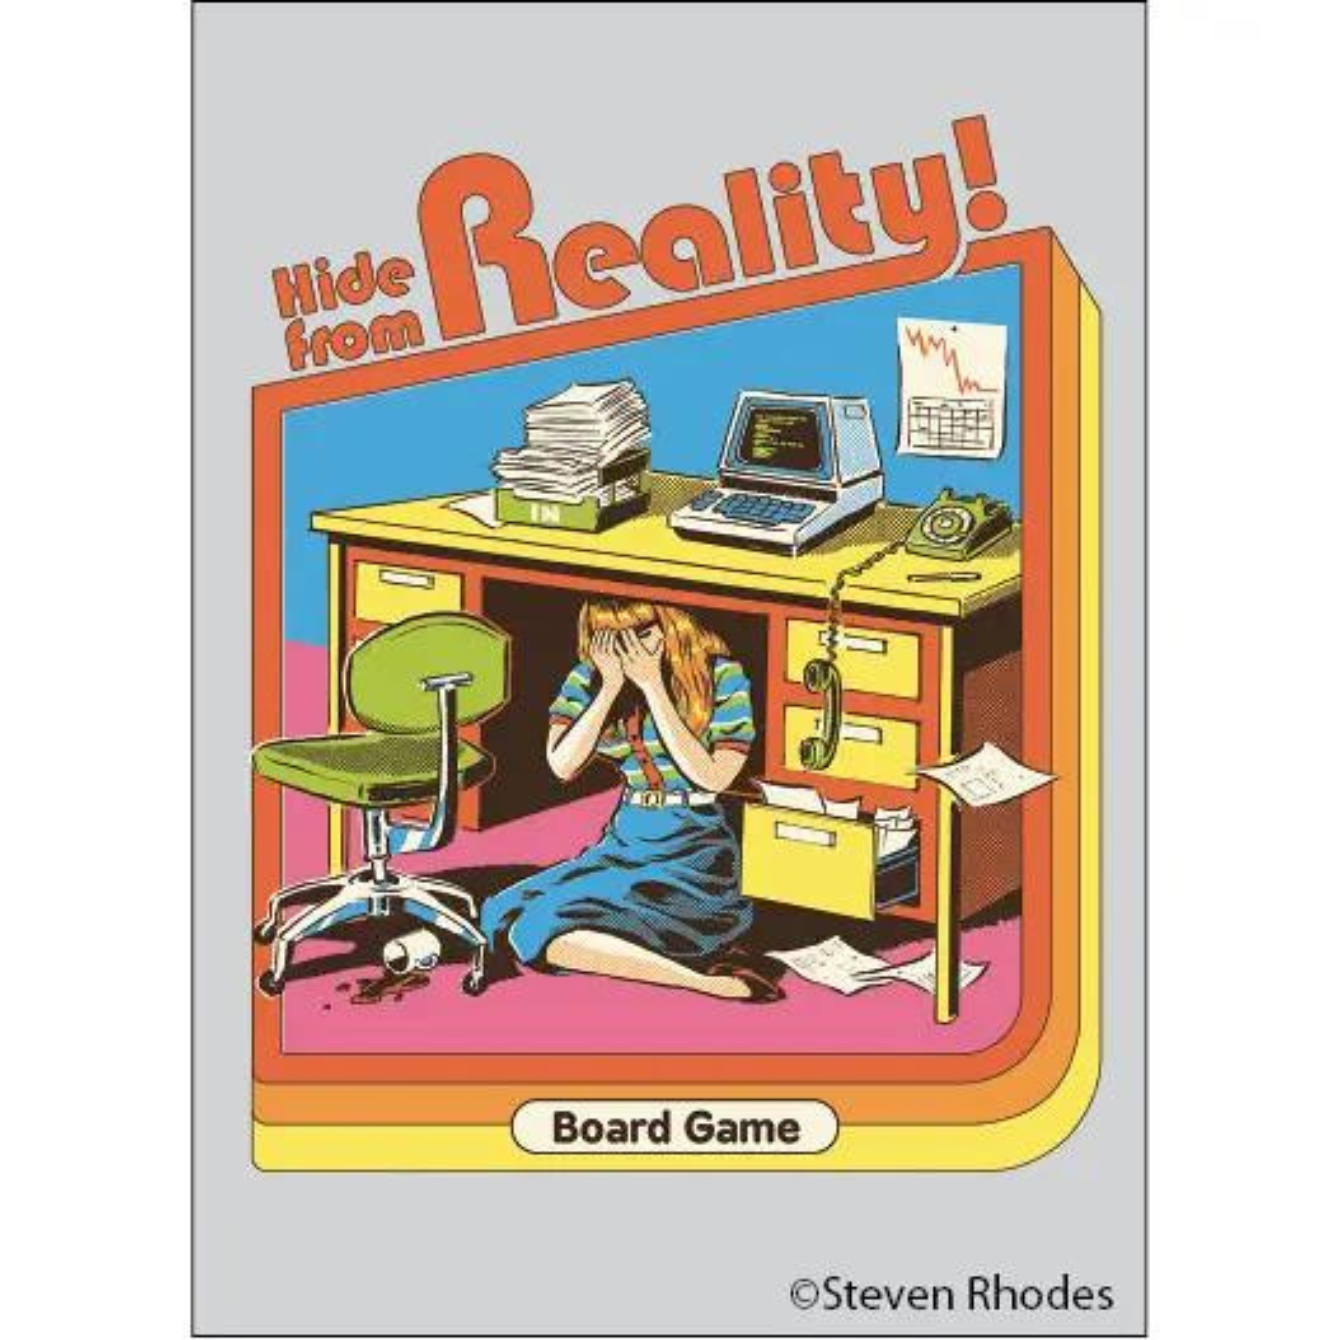 Hide from Reality Board Game